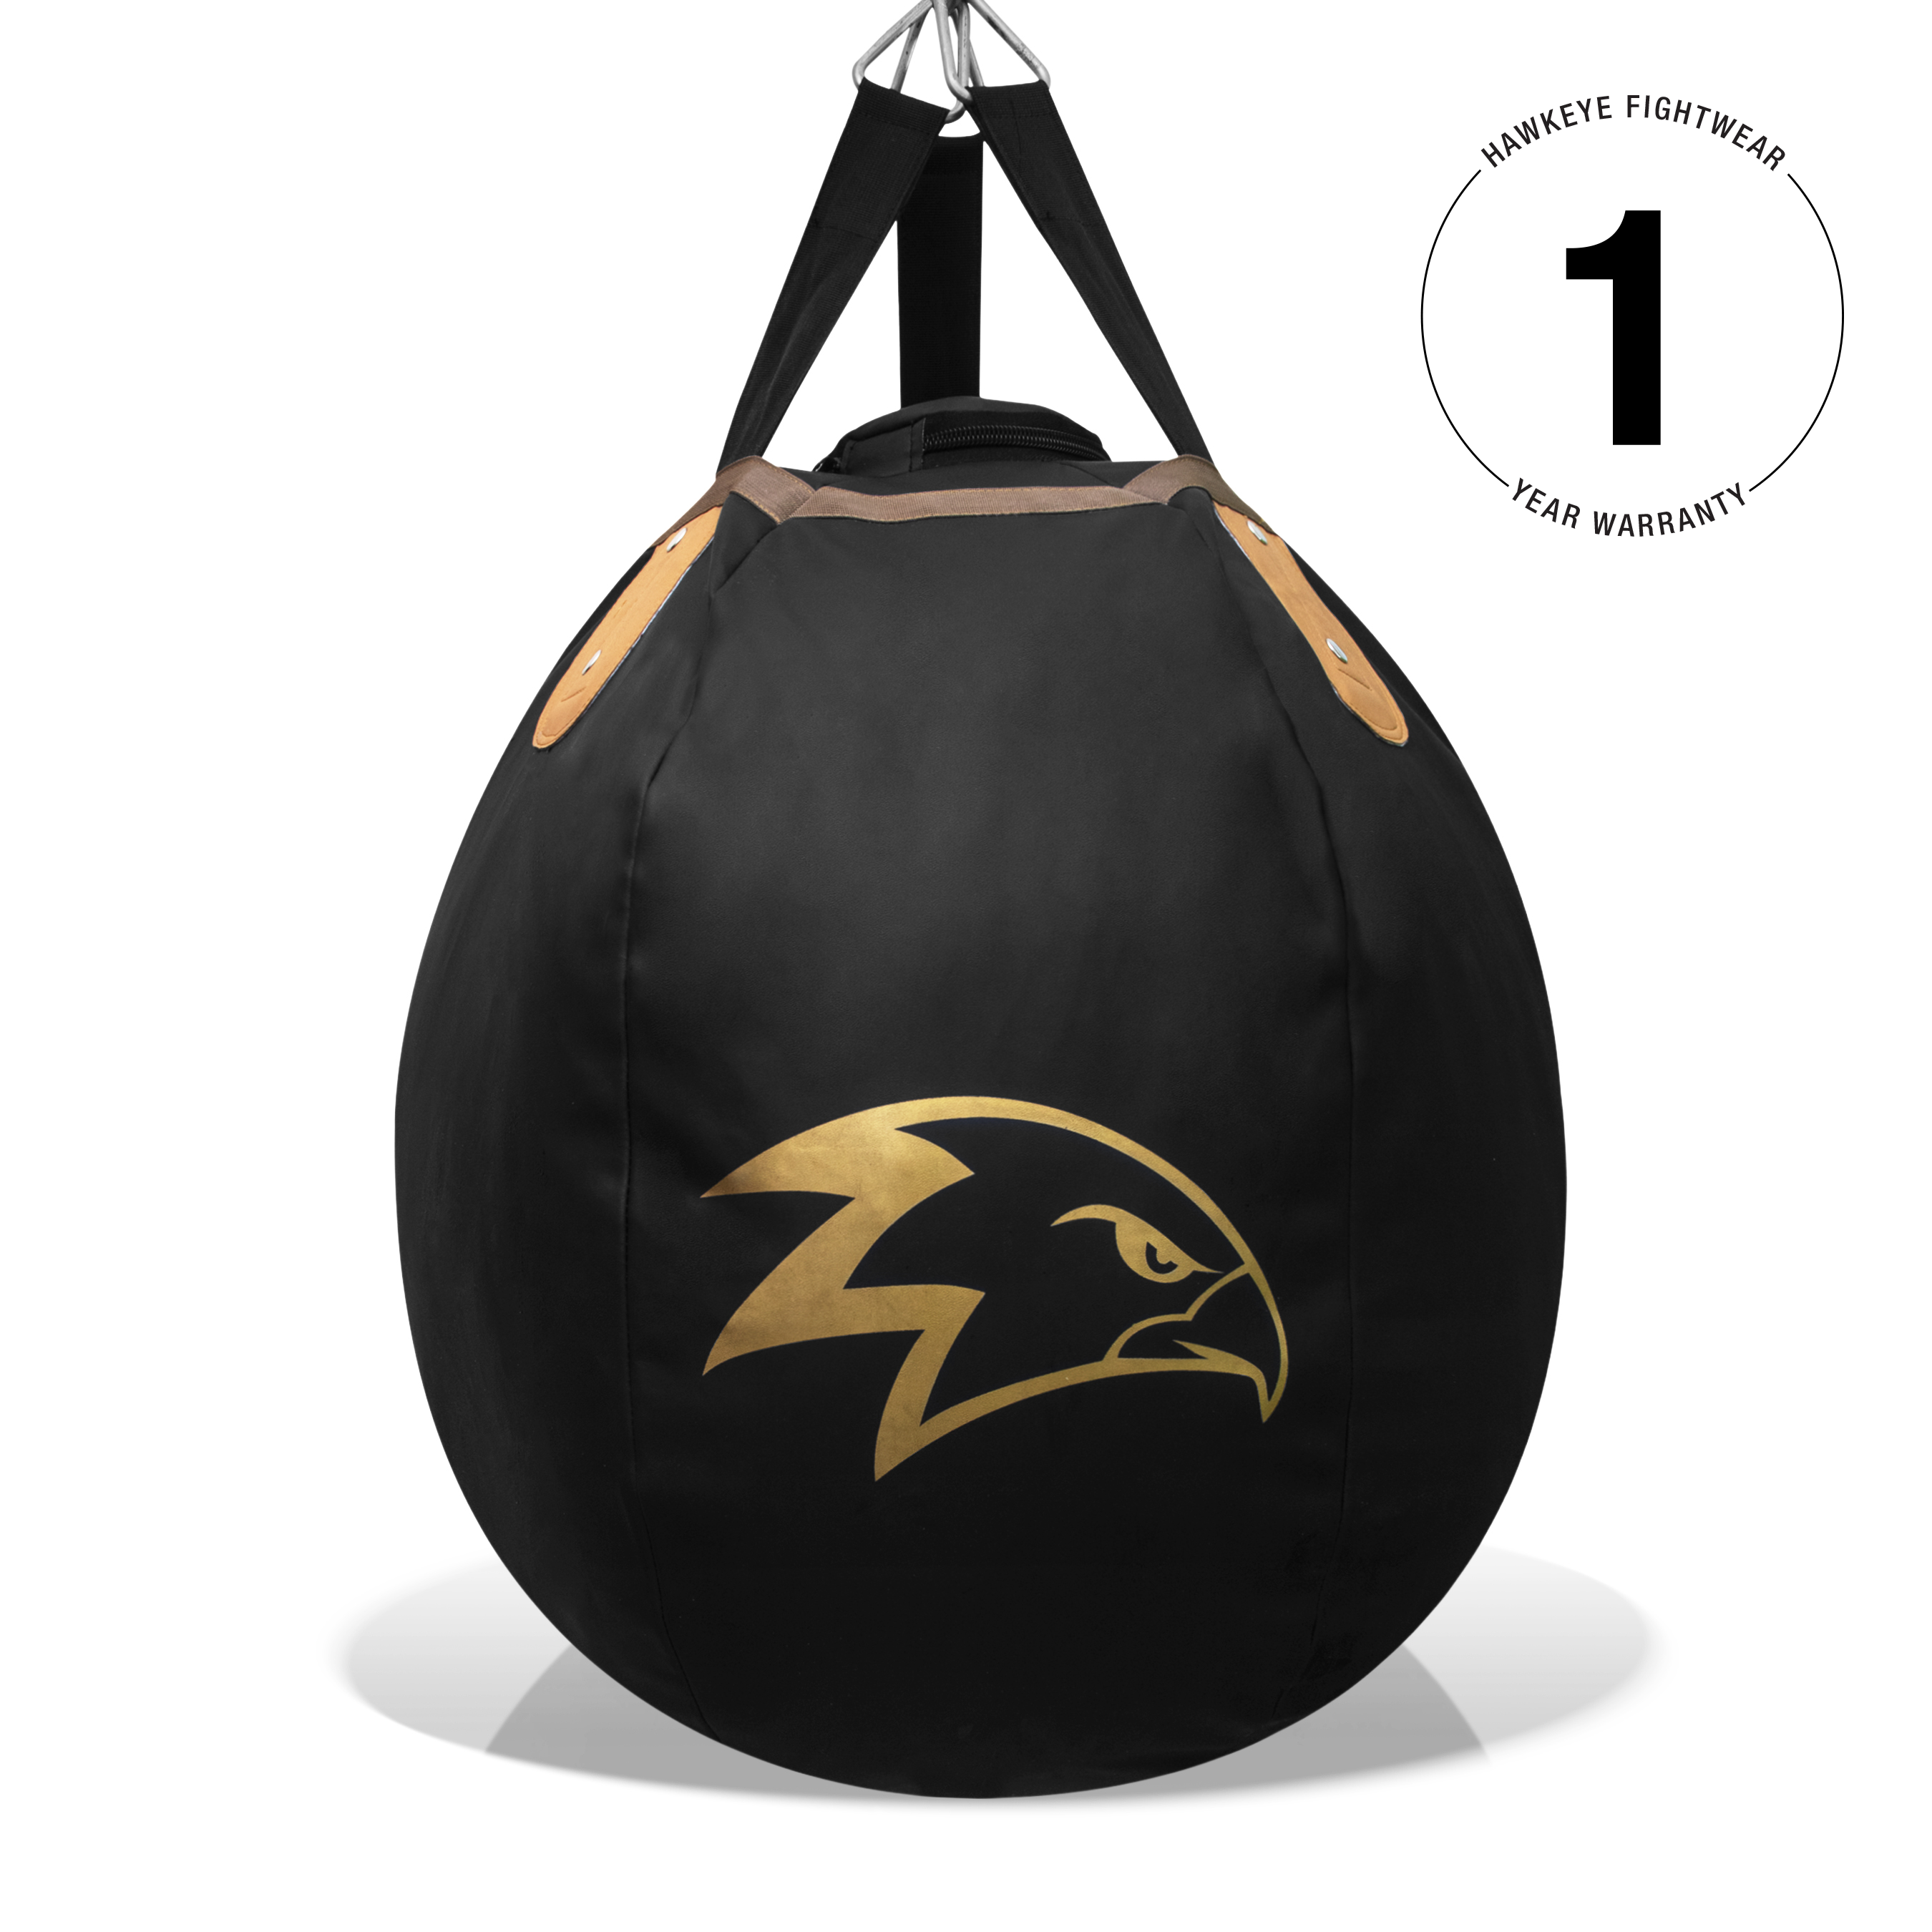 Wrecking Ball Heavy Bag Signature Unfilled